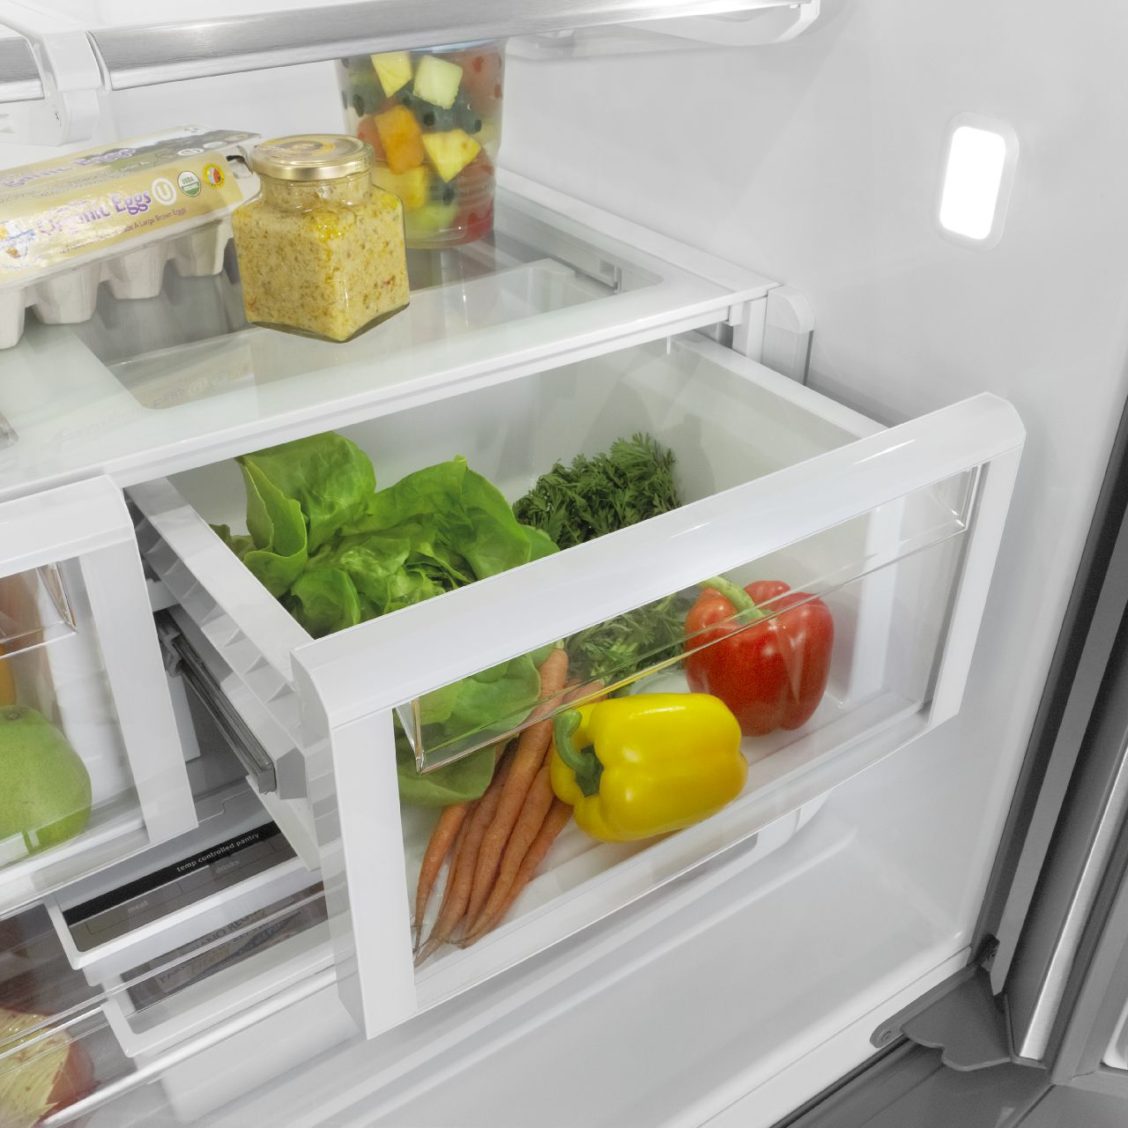 How To Remove Freezer Drawer Kenmore Grab N Go Refrigerator Youtube